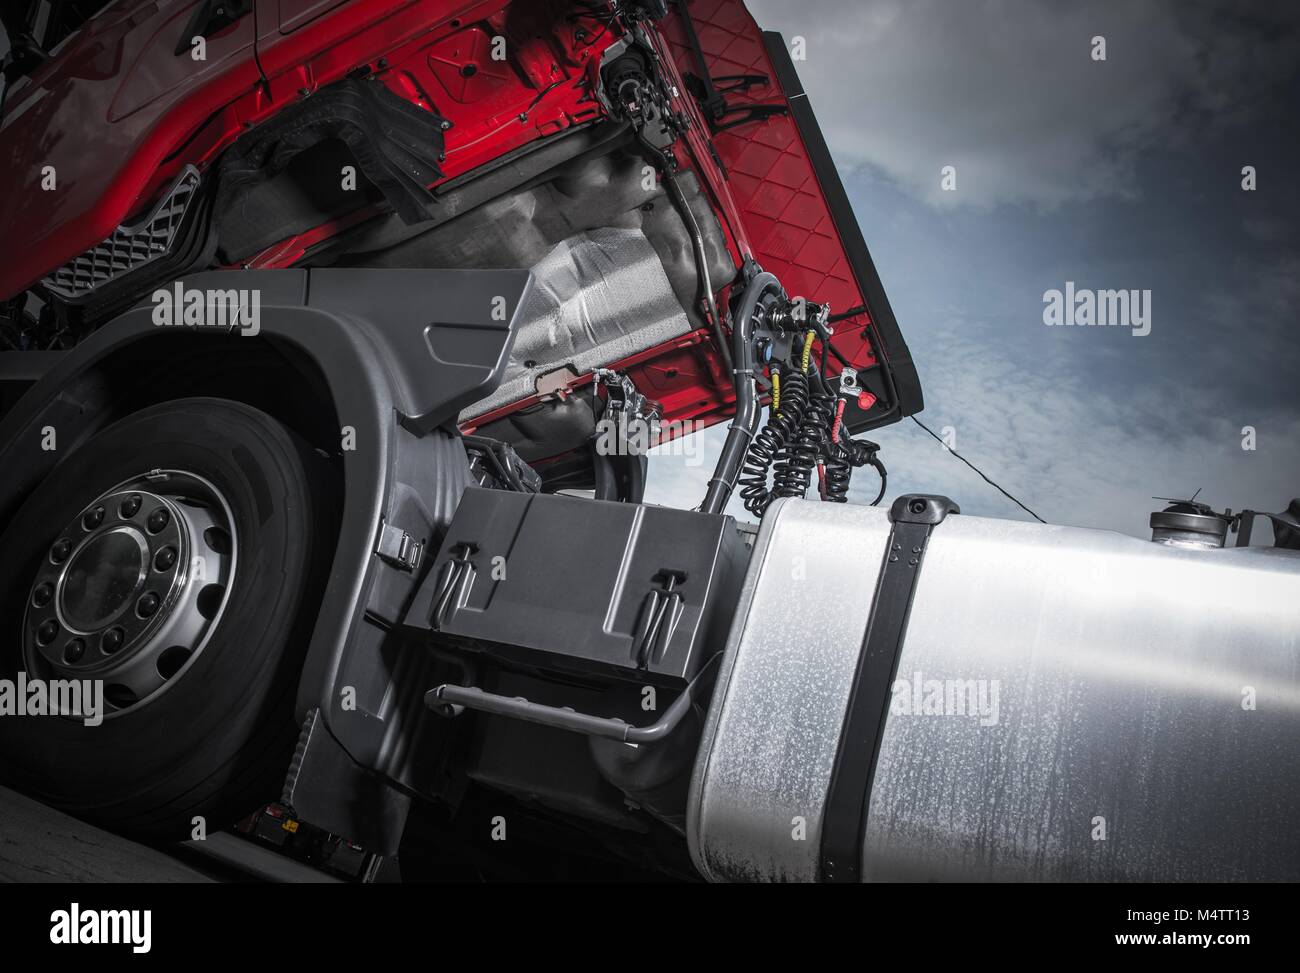 Maintenance of Semi Truck. Modern Euro Truck Tractor Oil and Filters Changing. Heavy Transportation Theme. Stock Photo